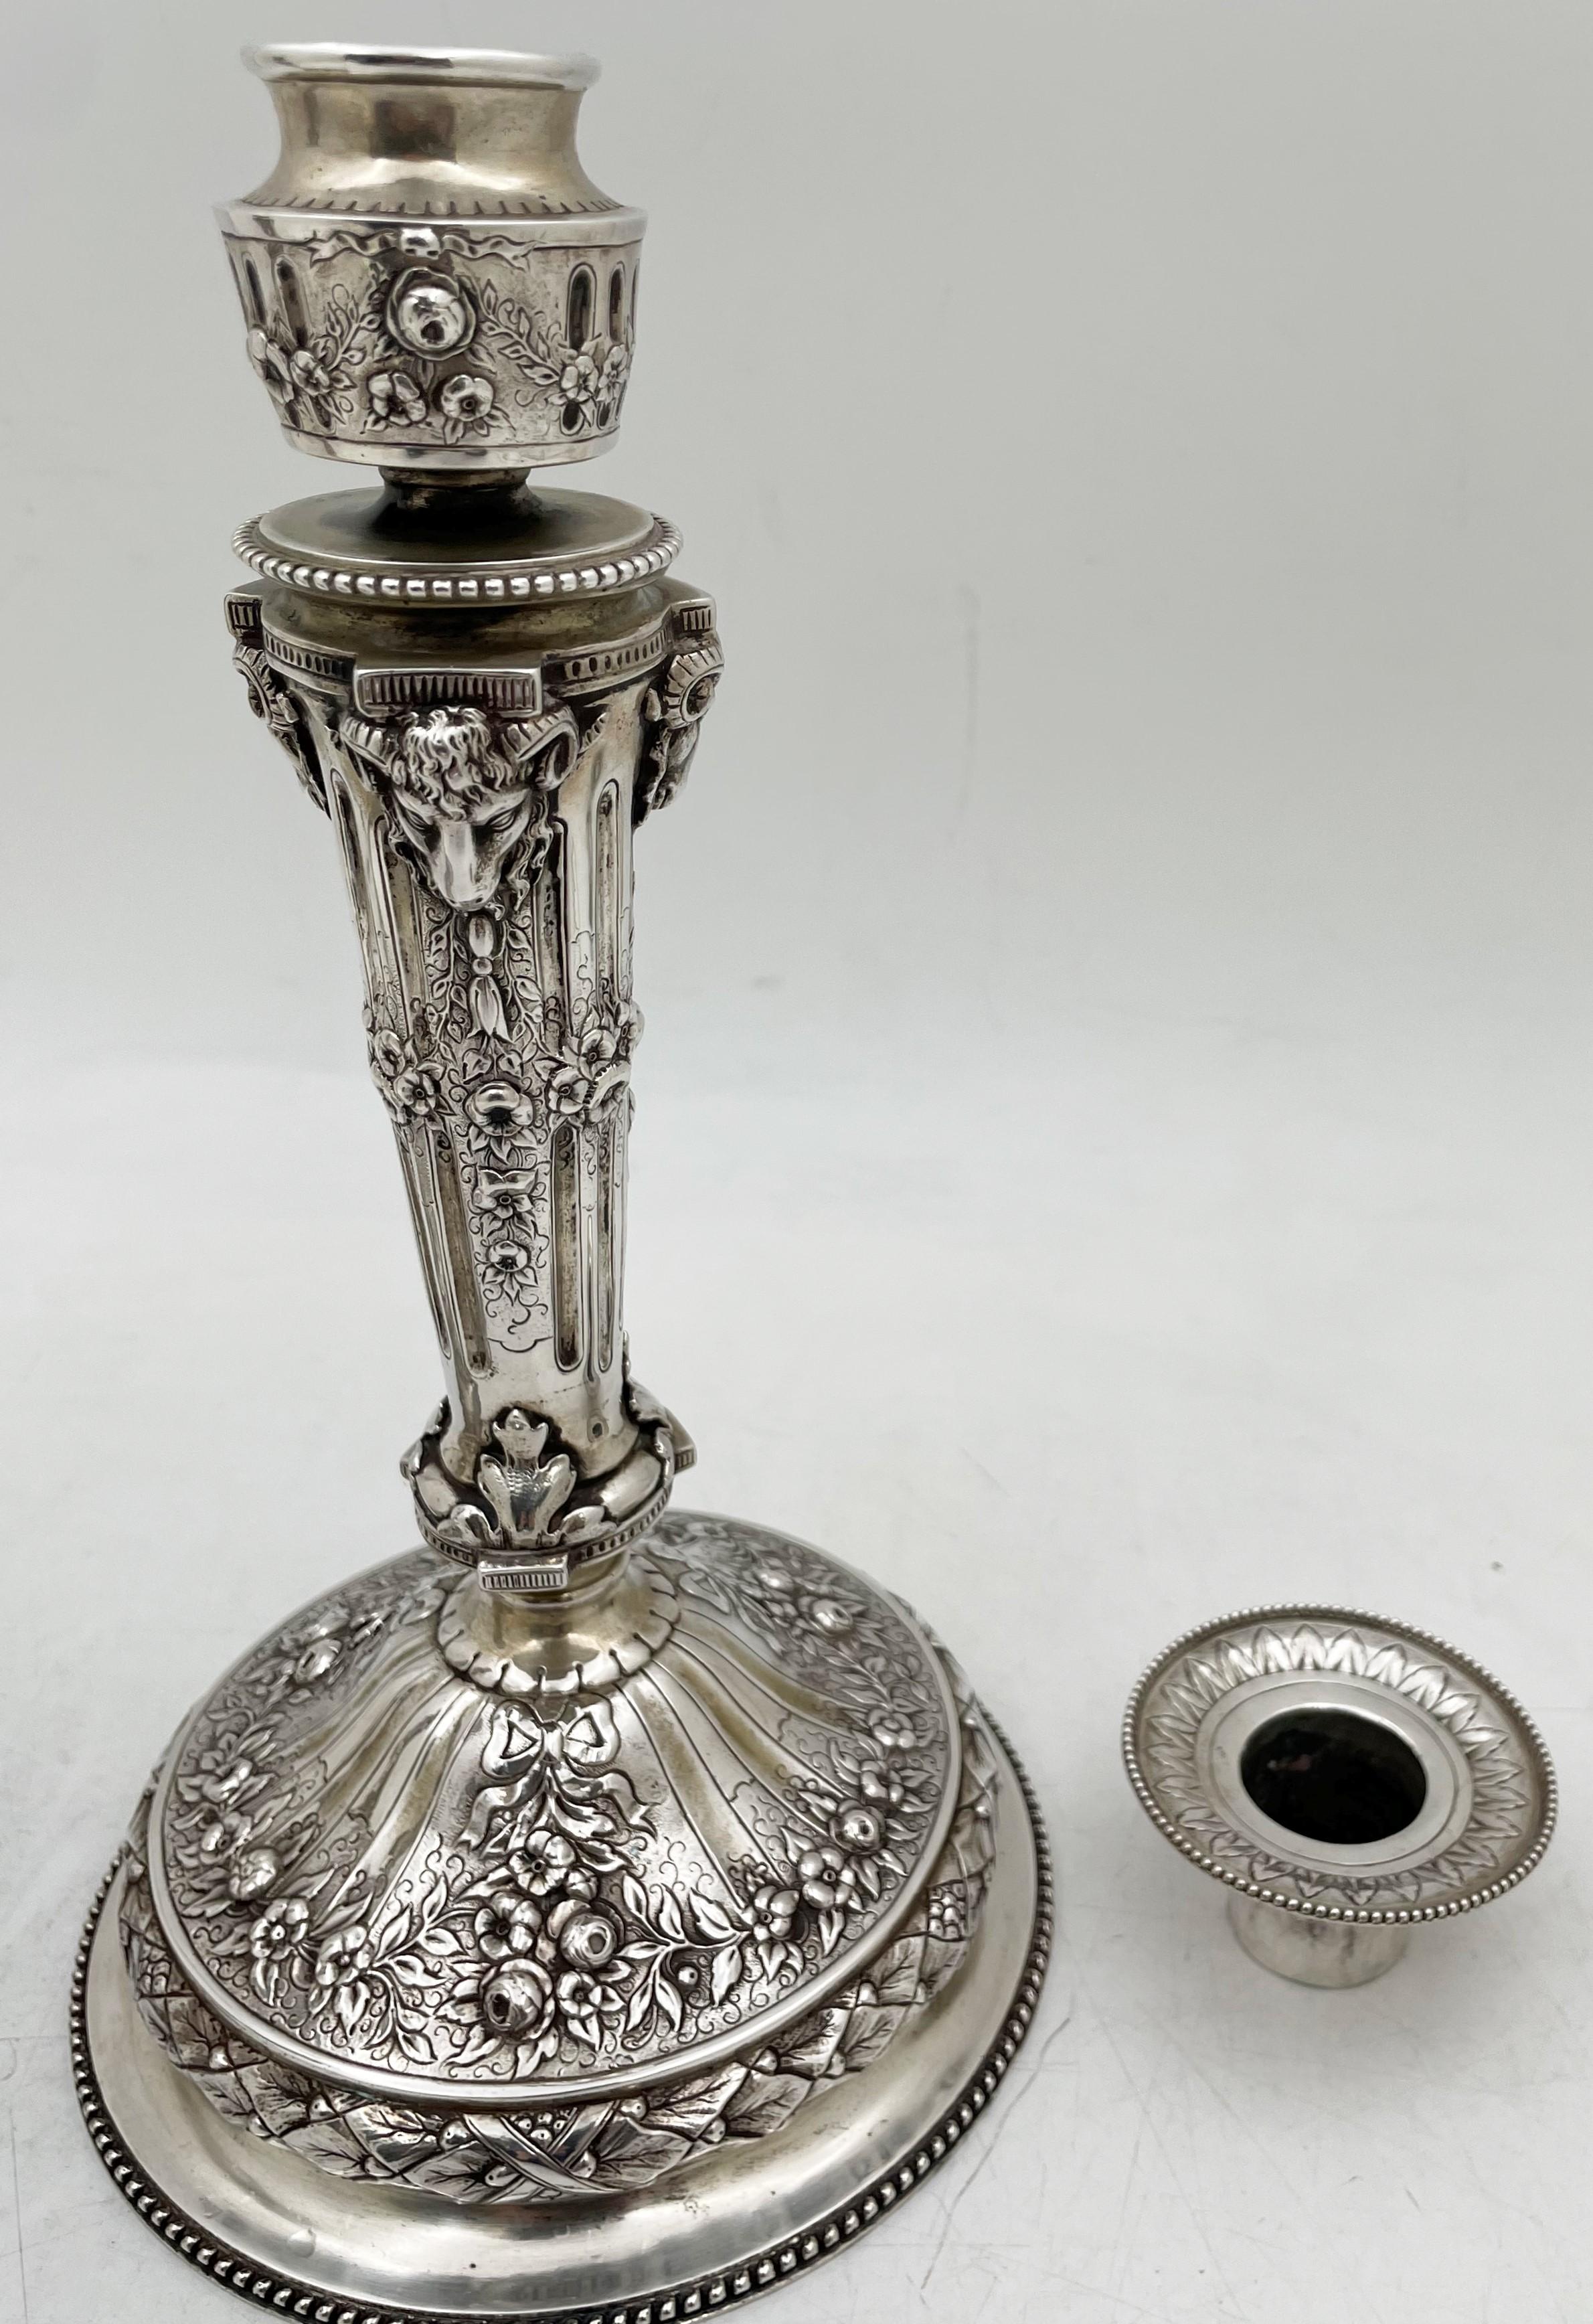 Pair of Continental Chased Silver Candlesticks from 19th Century with Rams' Head For Sale 2